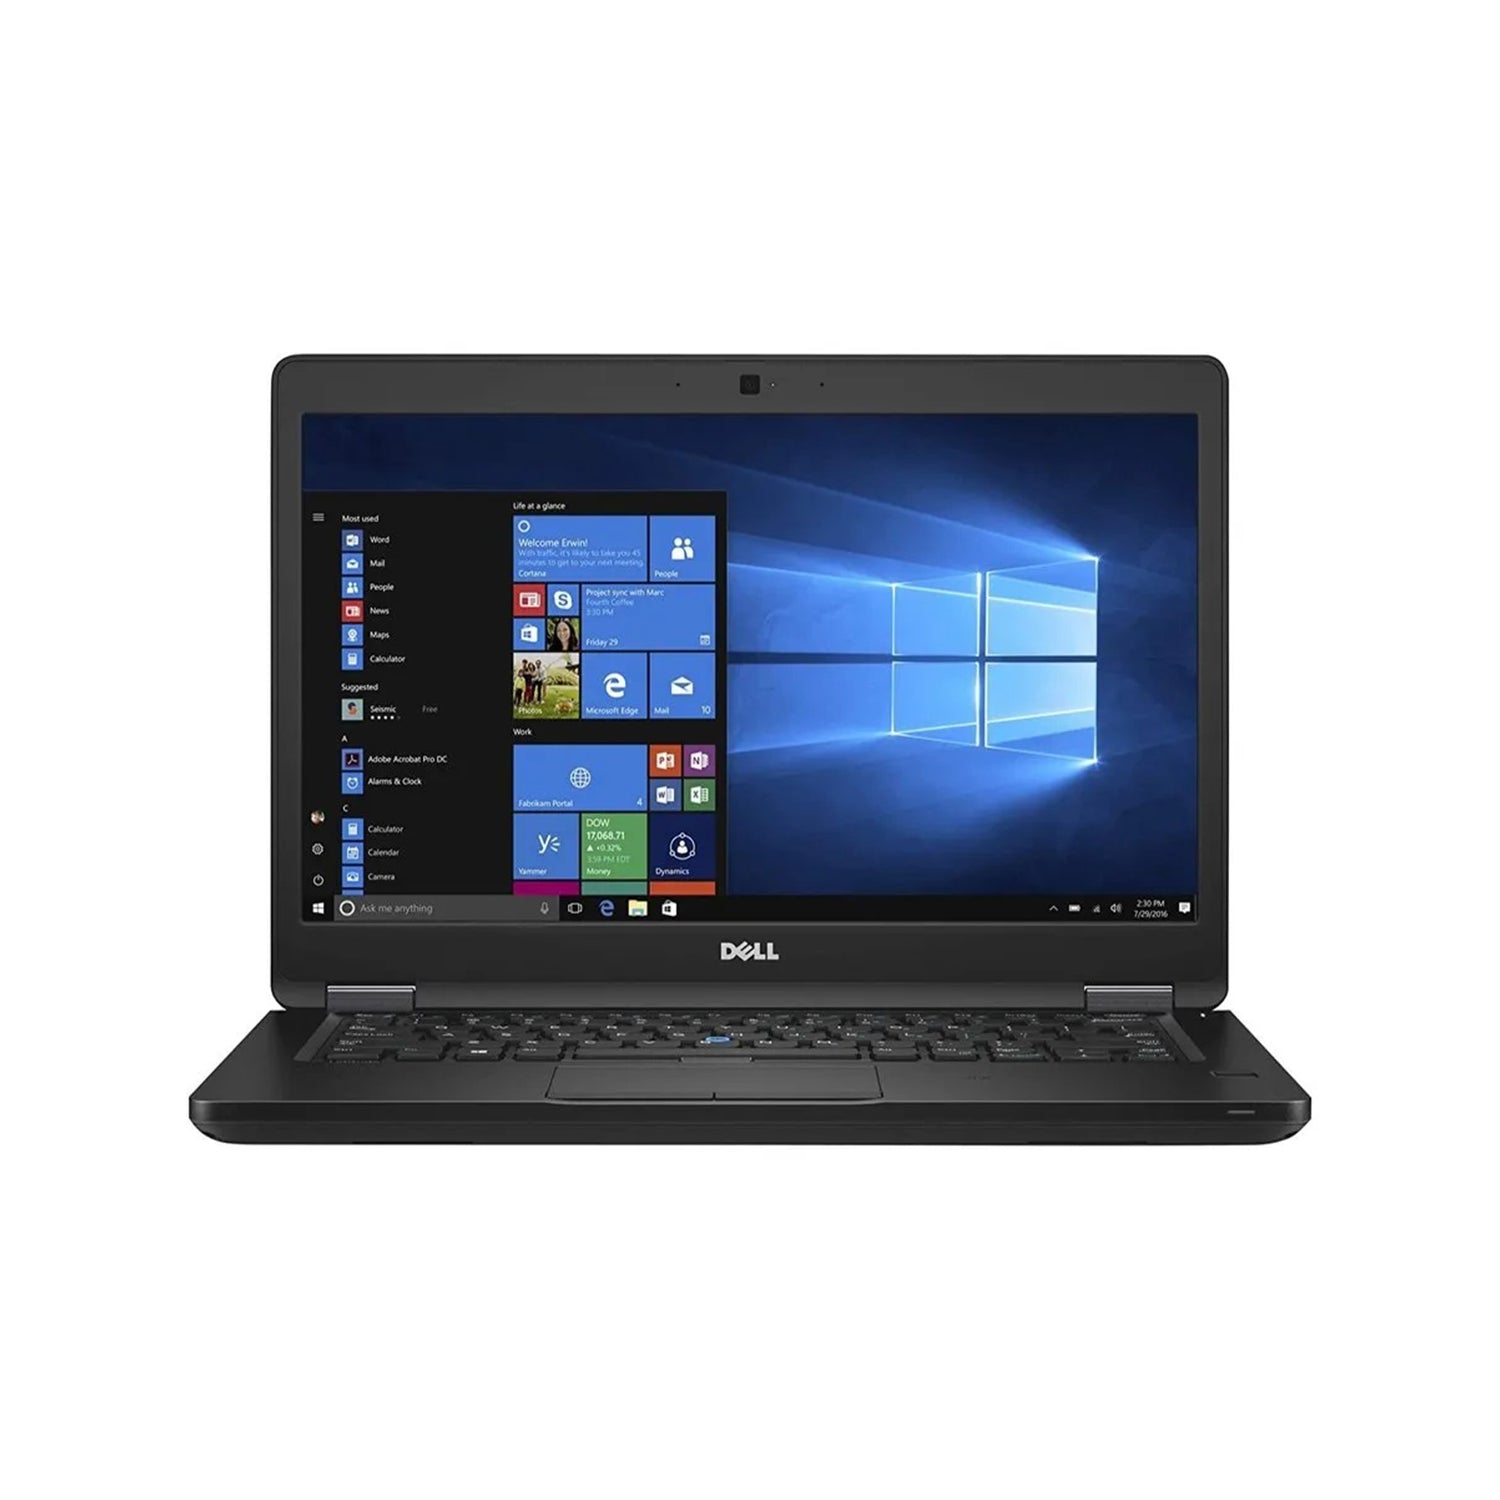 Dell Latitude 5480 14 inches Business Laptop - Intel Core i5-6300U Up to 3.00 GHz 8GB - 16GB DDR4 RAM 256GB - 512GB SSD Windows 10 Professional - Refurbished